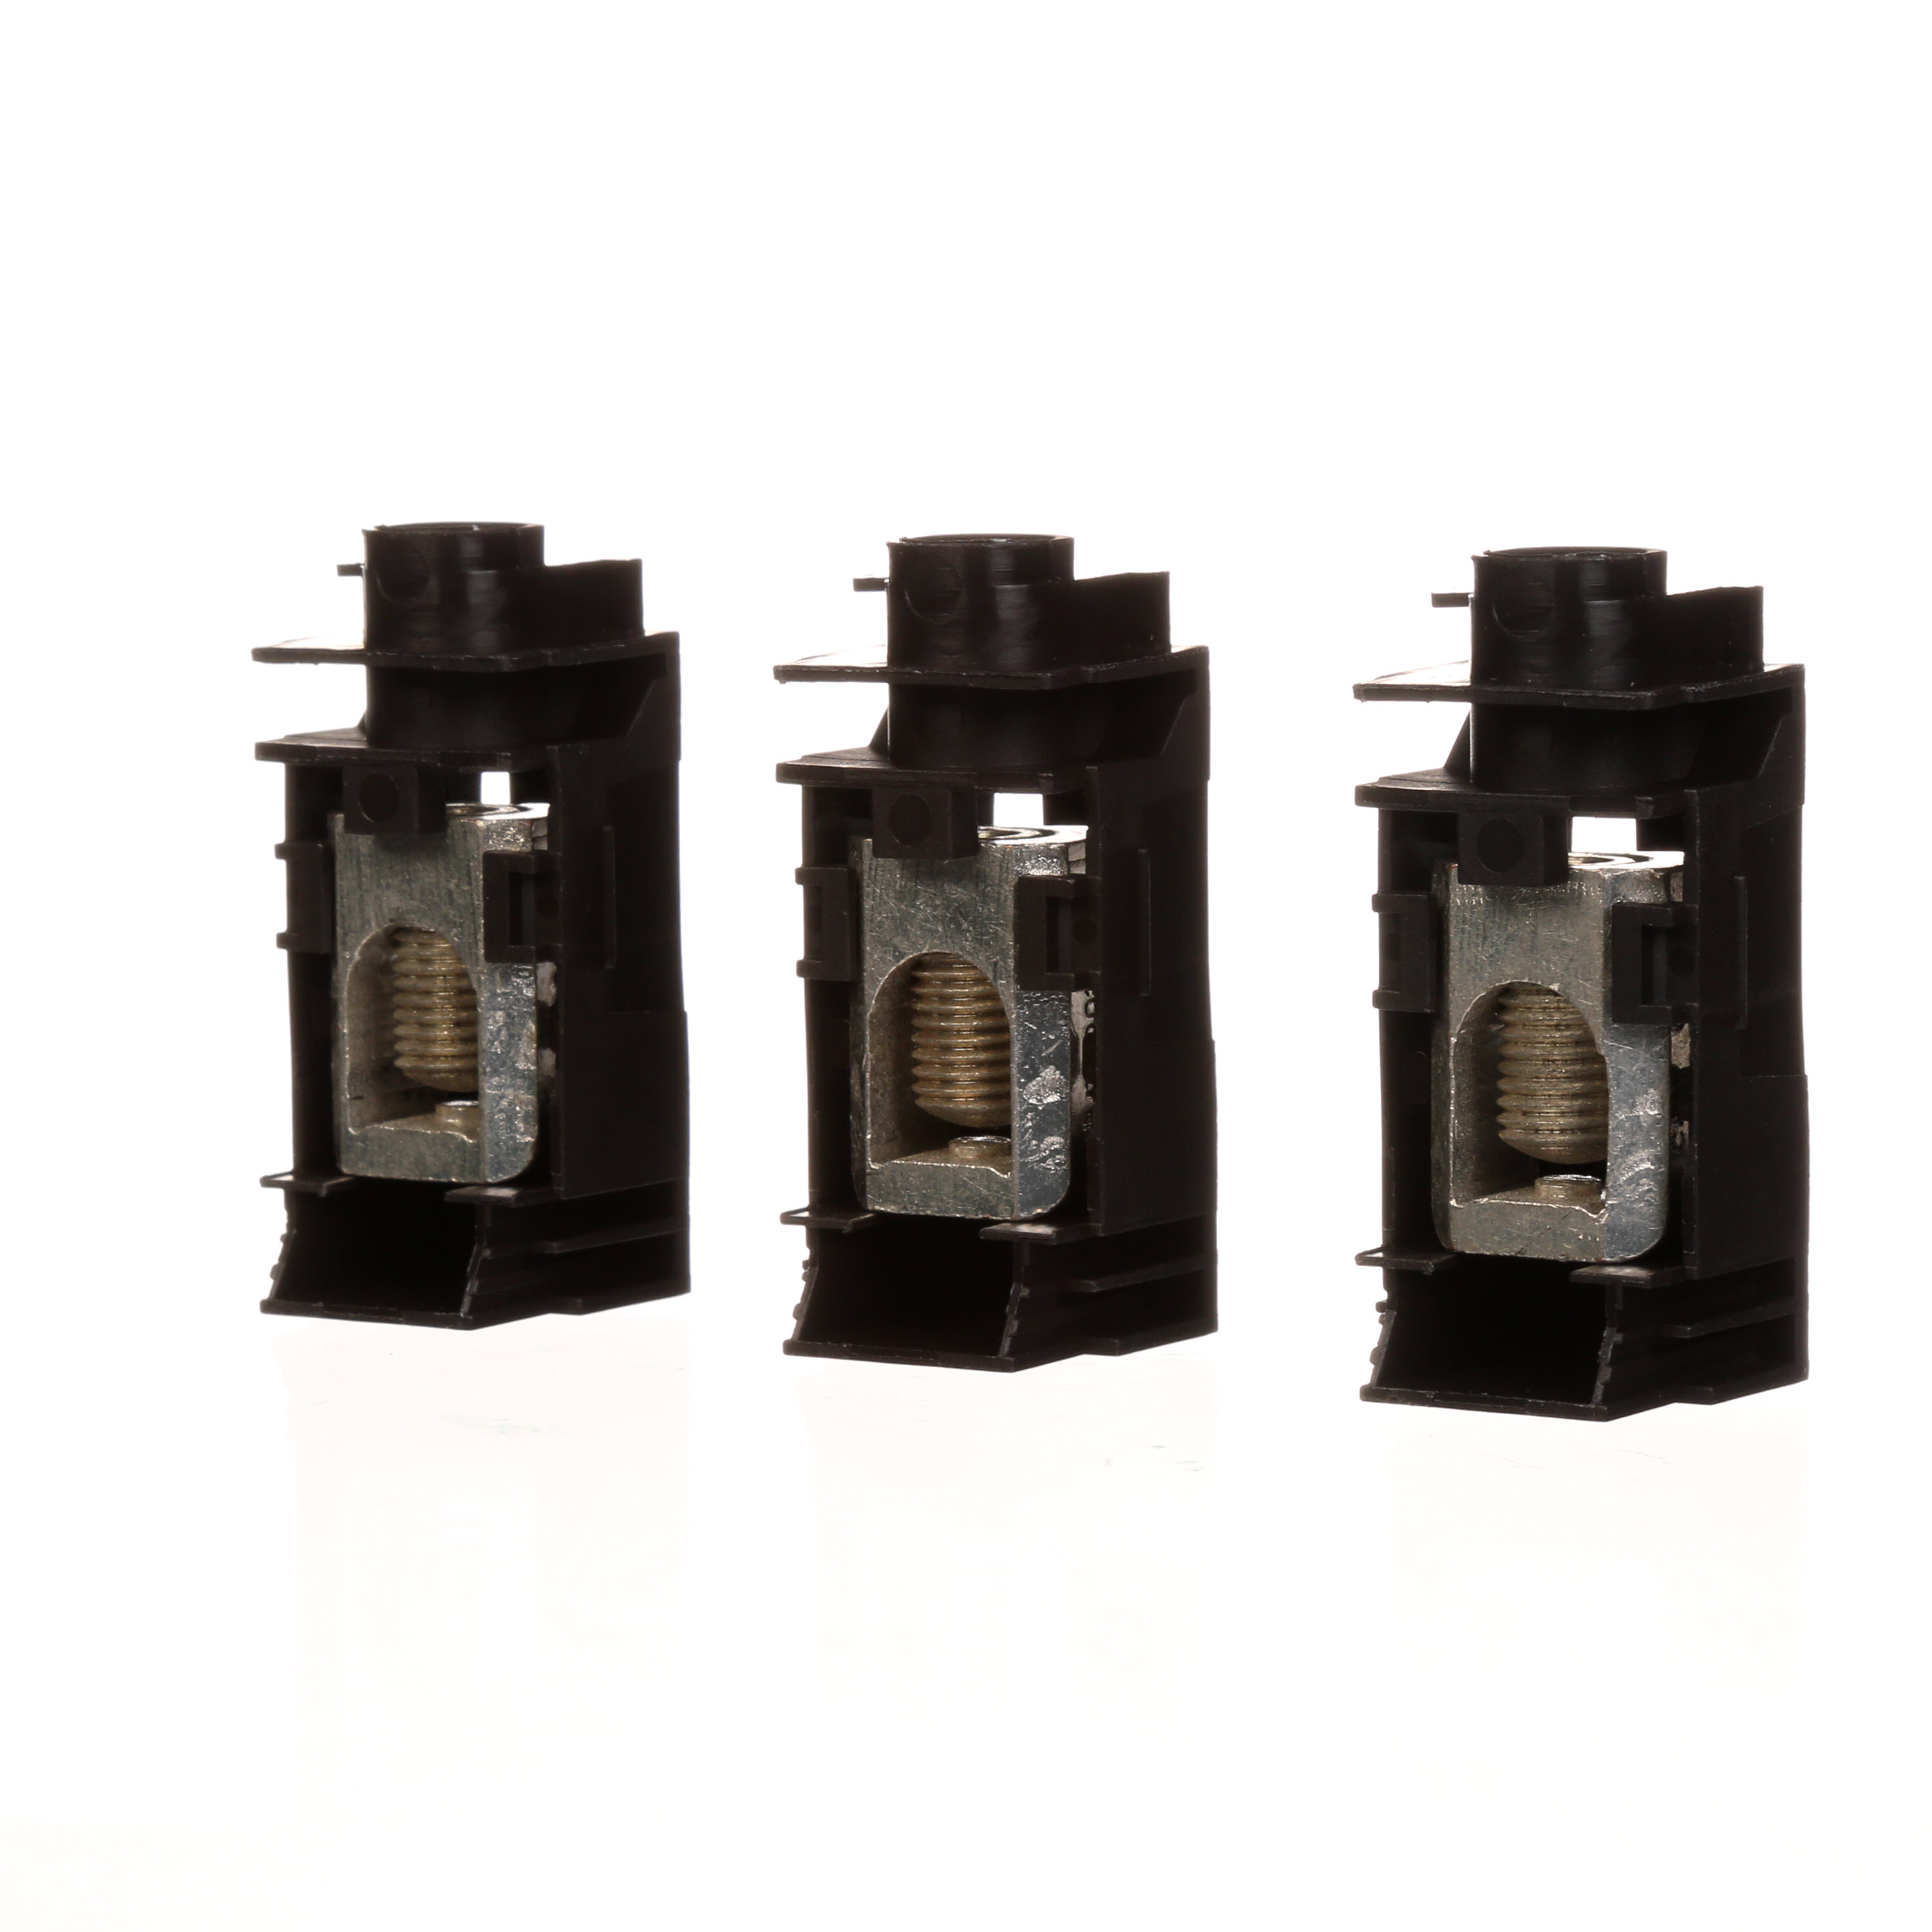 SIEMENS VL UL RATED CIRCUIT BREAKER ACCESSORY. 3 PIECE COPPER BODY LUG FOR 30A - 150A DG FRAME BREAKER. WIRE RANGE 6 - 3/0 AWS (CU ONLY)- 1 BARREL LUG. SUITABLE FOR LINE AND LOAD SIDES. REQUIRED FOR 100 PERCENT RATED BREAKERS.